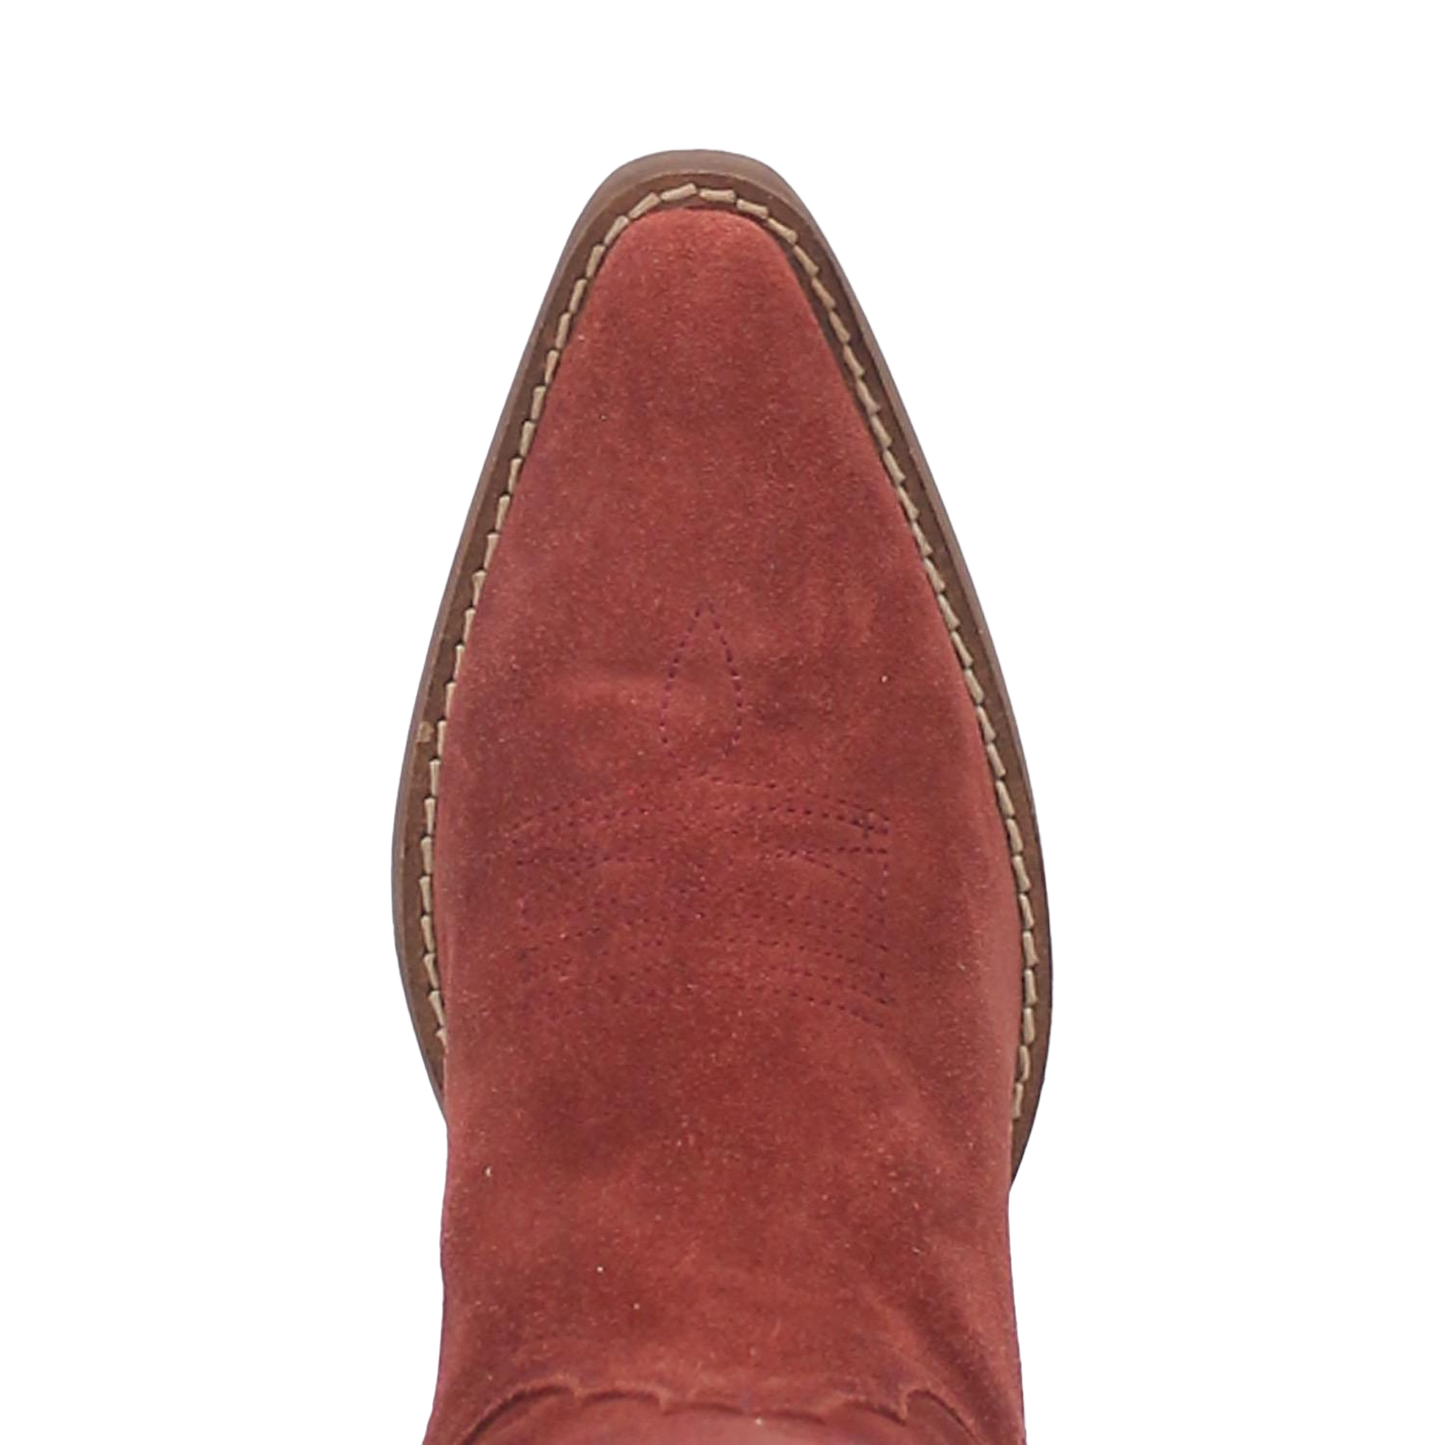 Dingo Ladies Out West Cranberry Tall Western Boots DI920-RD12